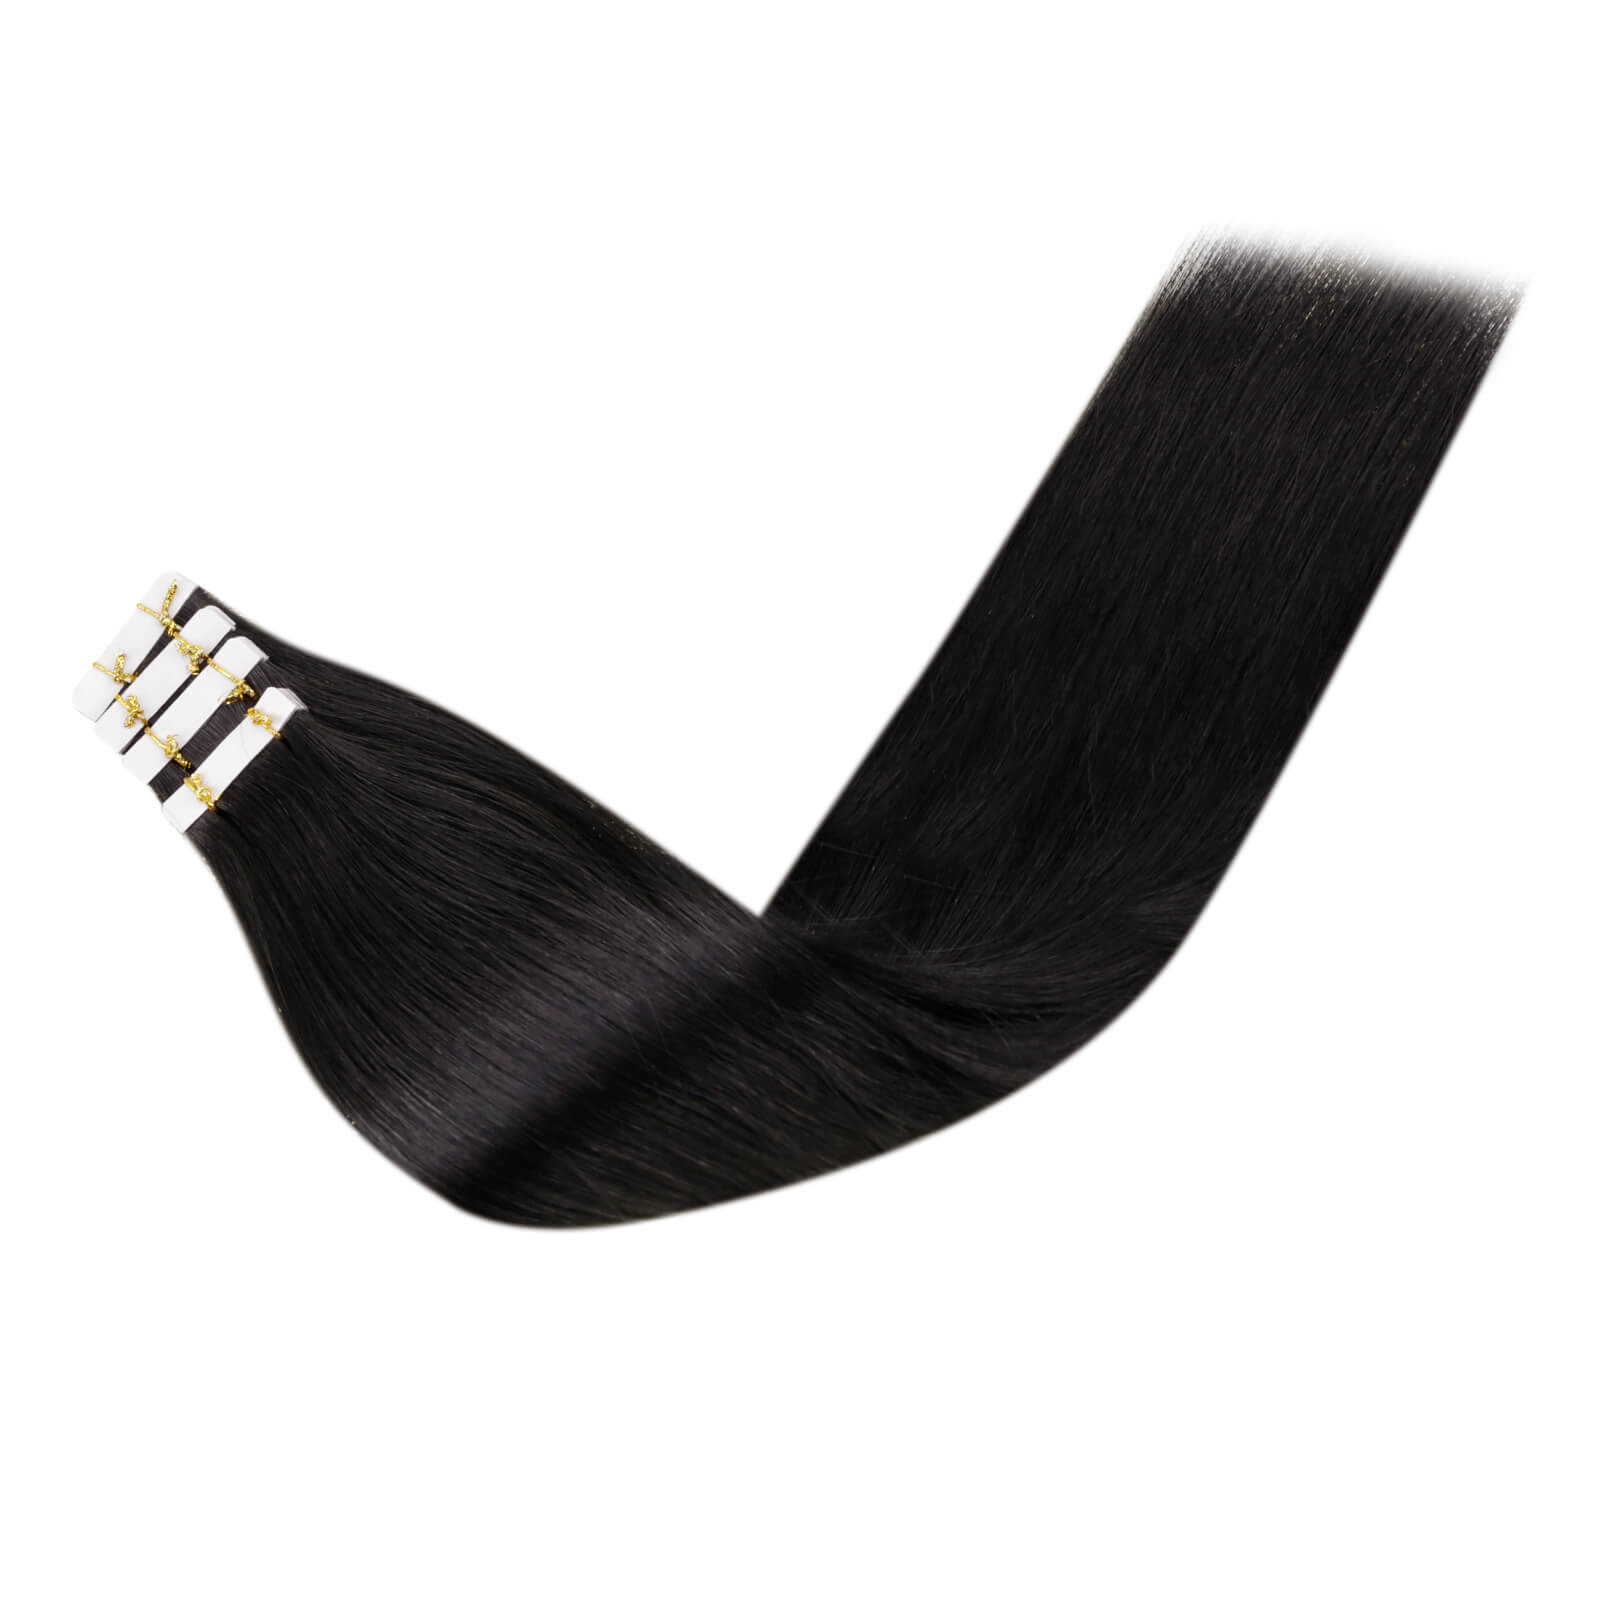 [Virgin Hair] Injection High Quality Tape in Human Hair Extensions Off Black #1b| LaaVoo